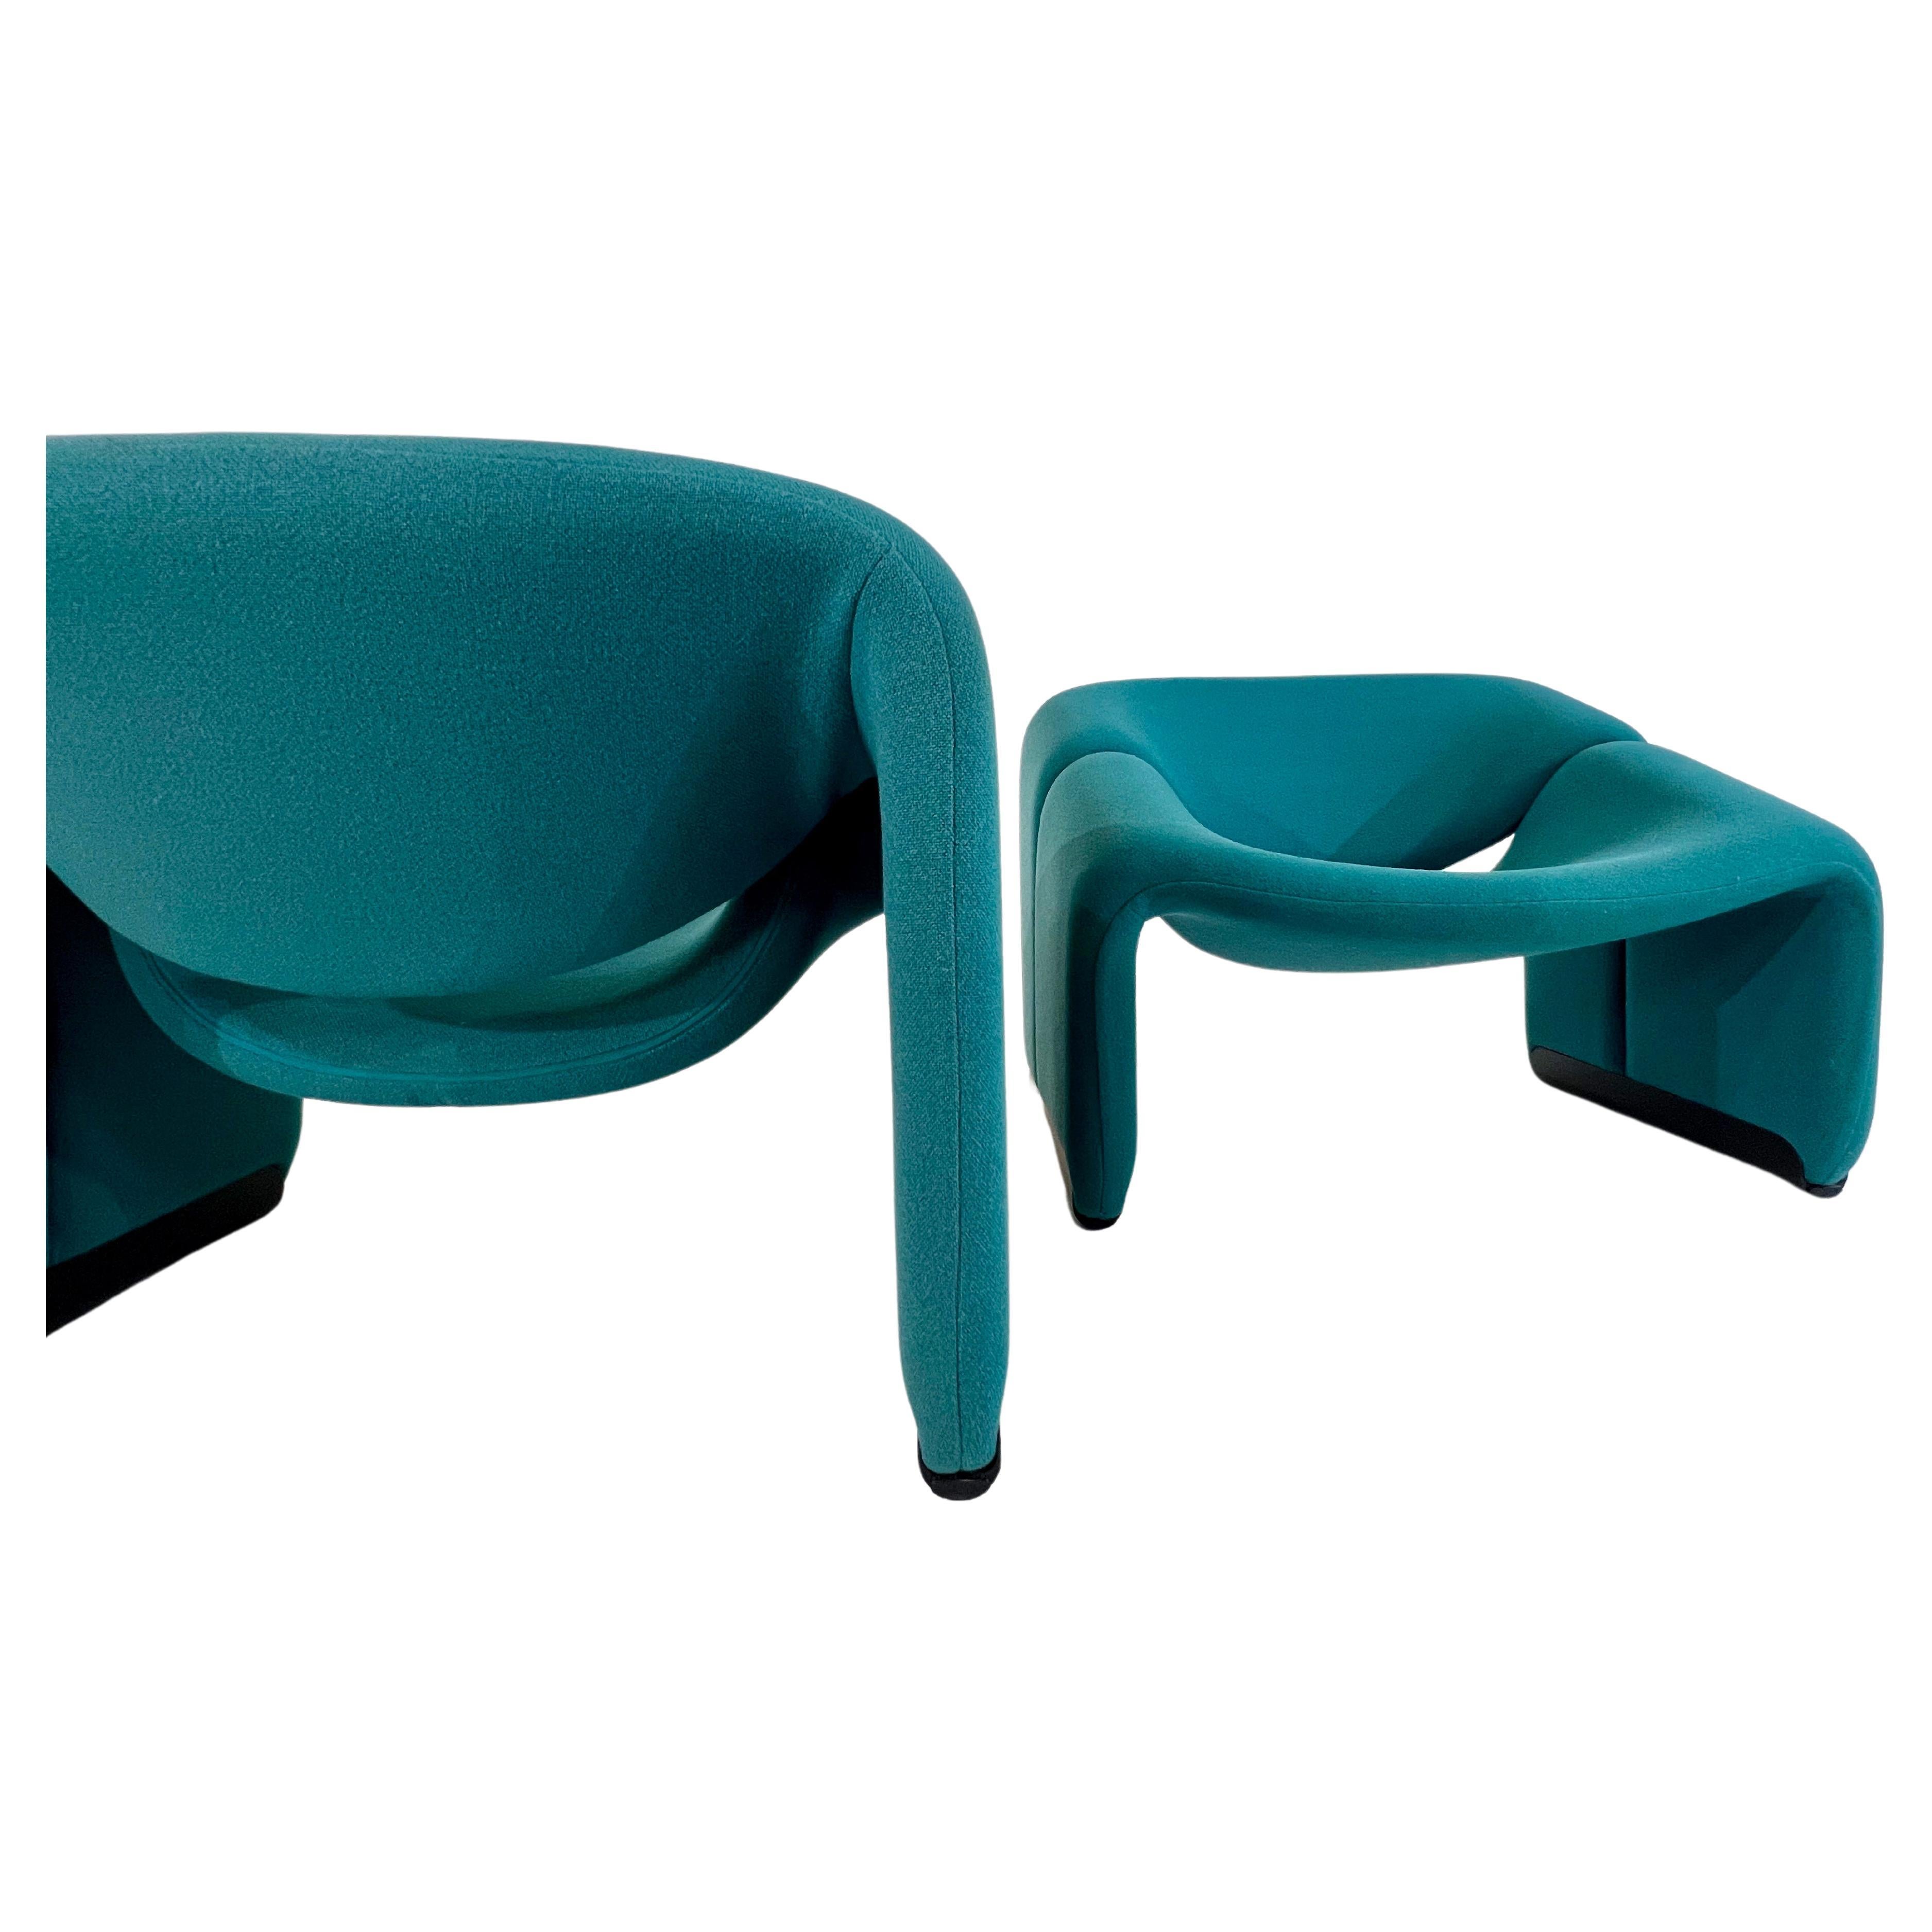 Pair of arm chairs F598 (Groovy) by Pierre Paulin for Artifort. ONE LEFT!